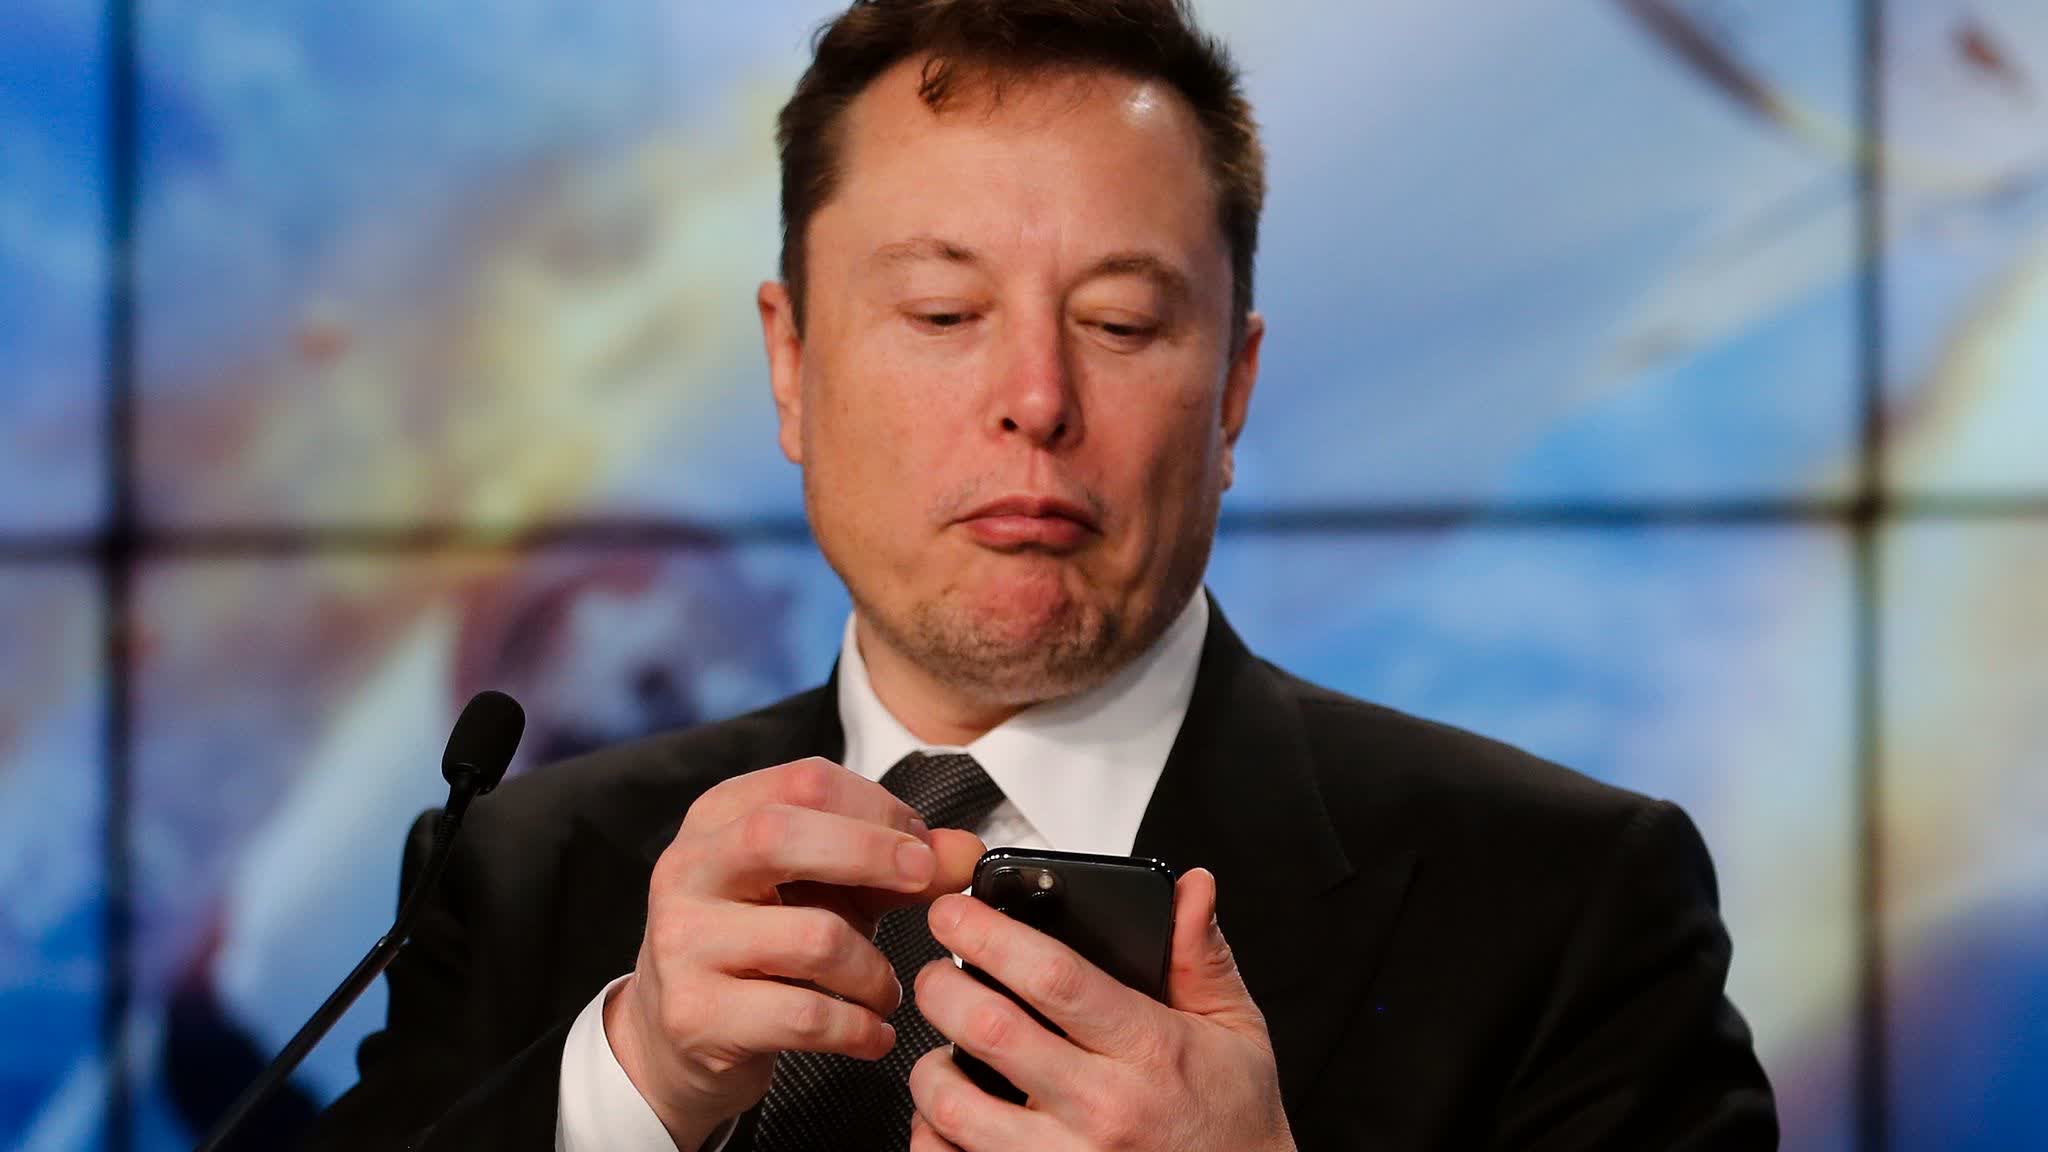 Elon Musk says he'll build his own smartphone if Apple and Google ban Twitter